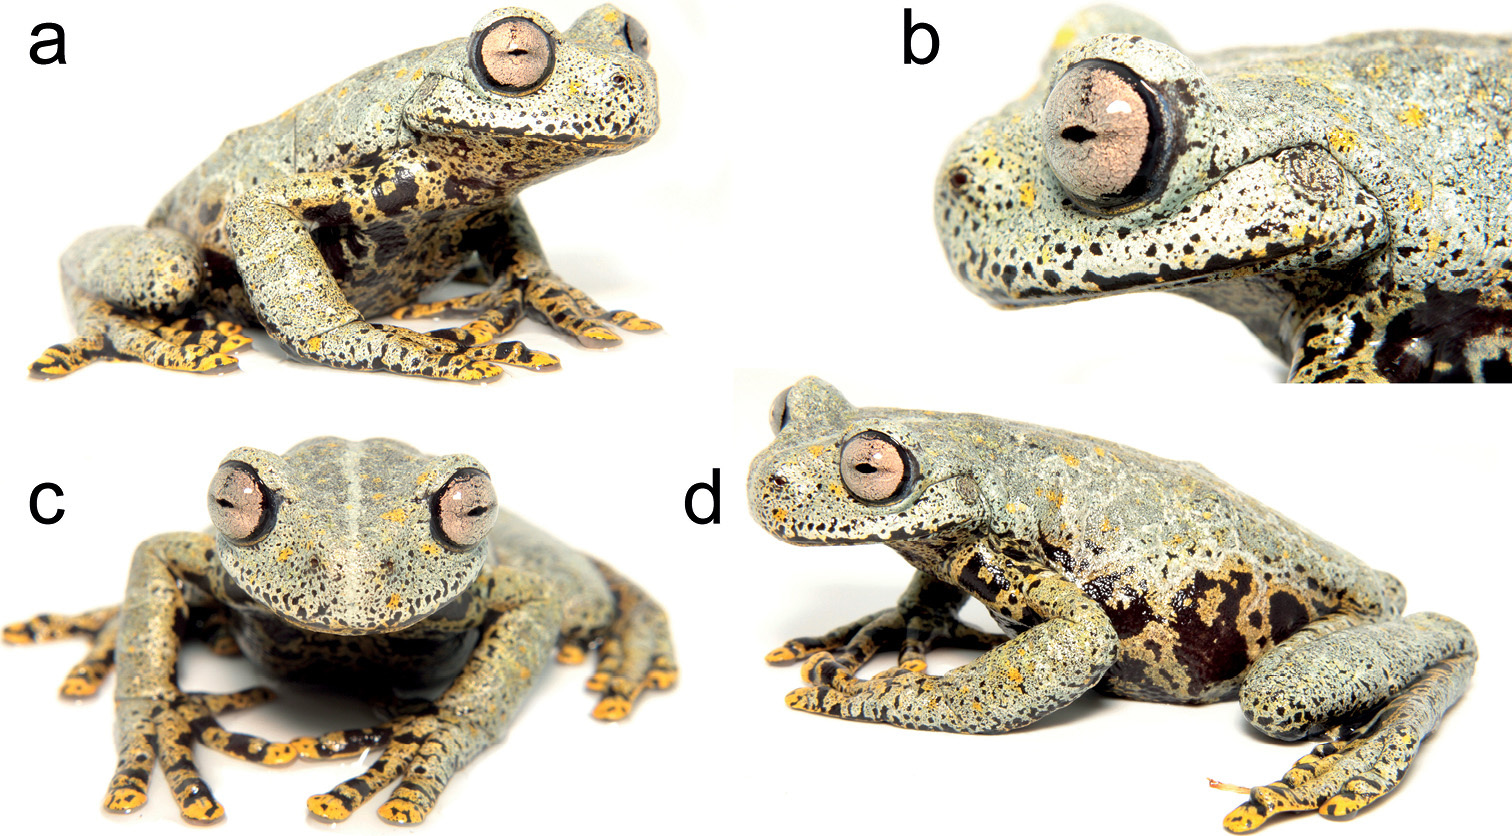 New Frogs from Ecuador